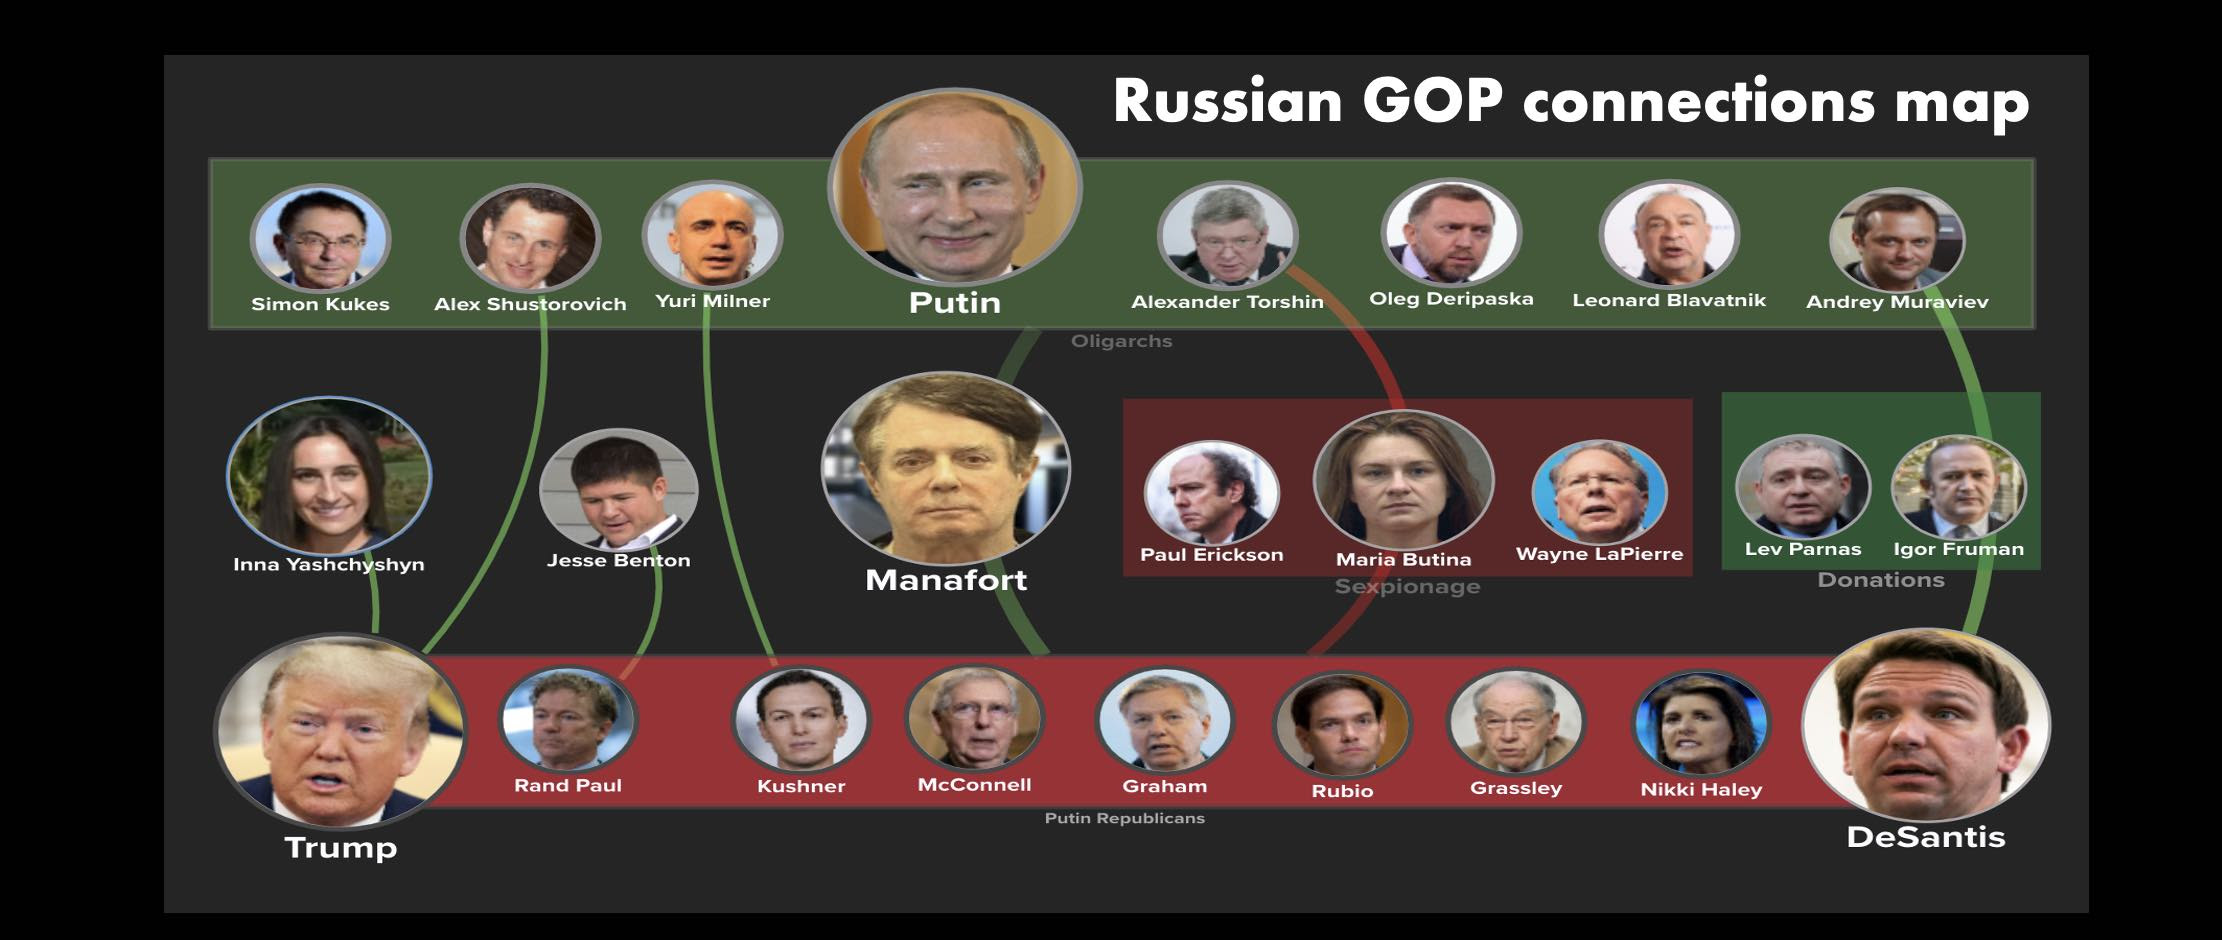 Follow the connections between Russian oligarchs, Trump and the GOP with this relationship map.